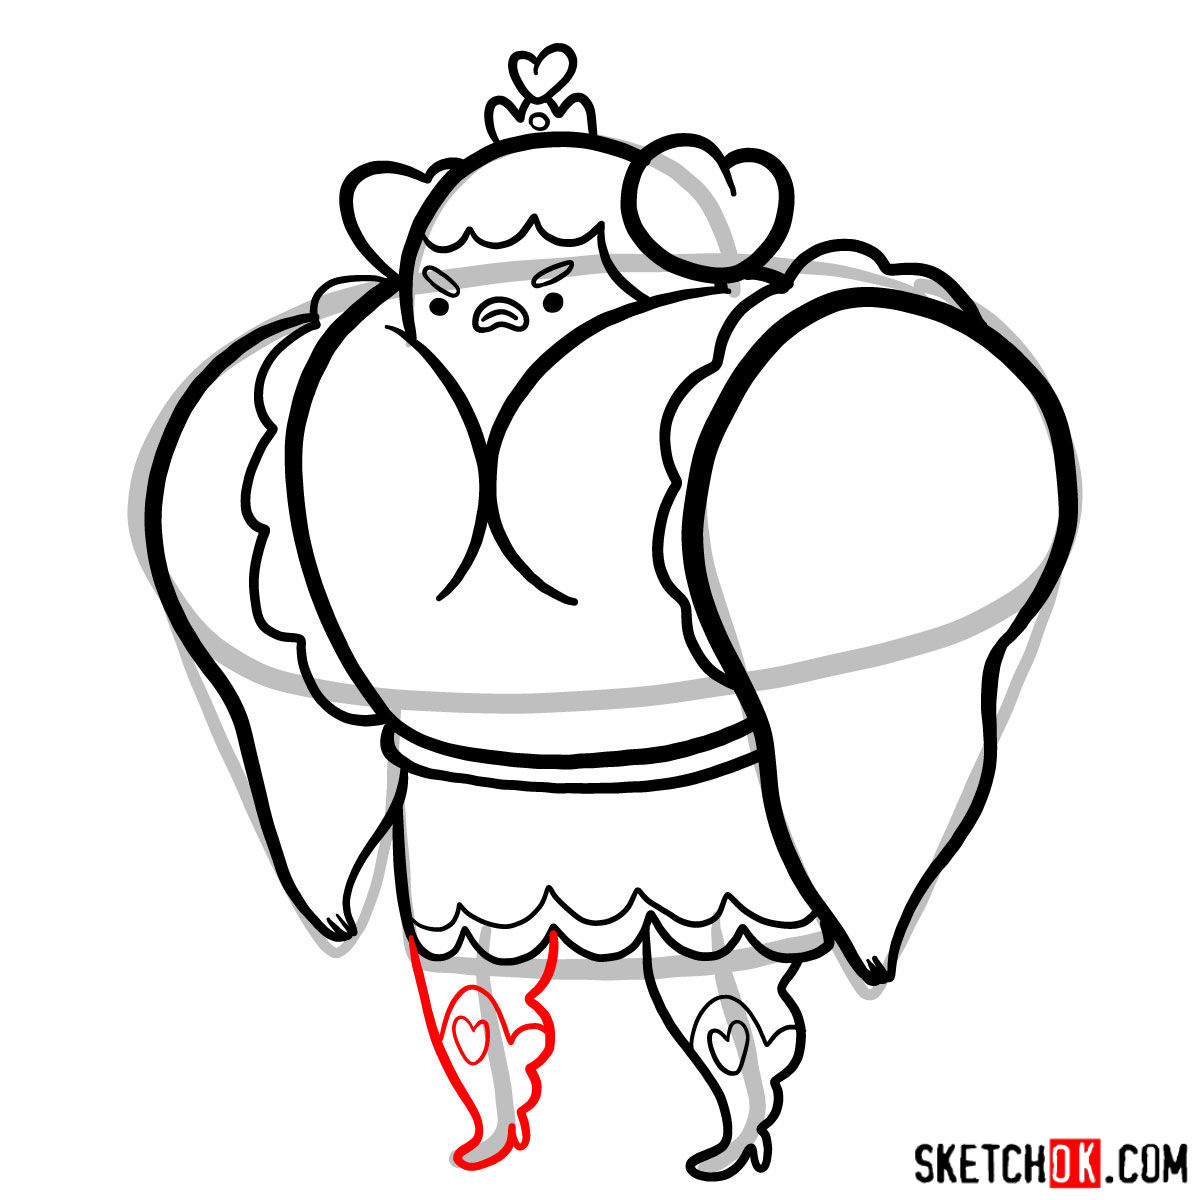 How to draw Muscle Princess from Adventure Time - step 10